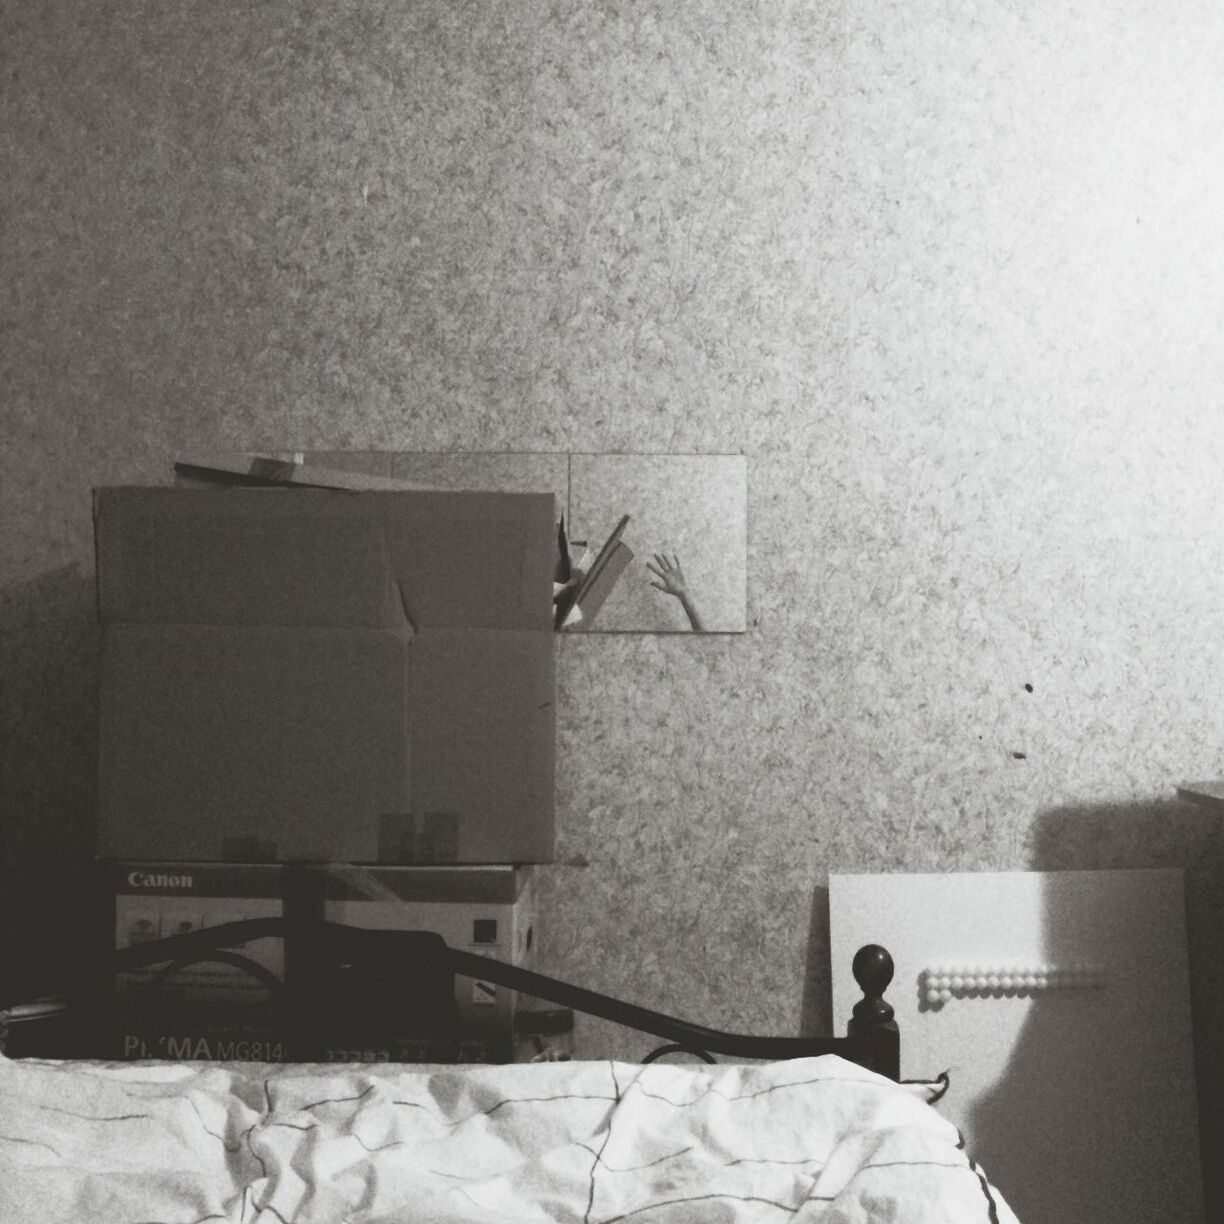 indoors, bed, bedroom, home interior, hospital, no people, technology, day